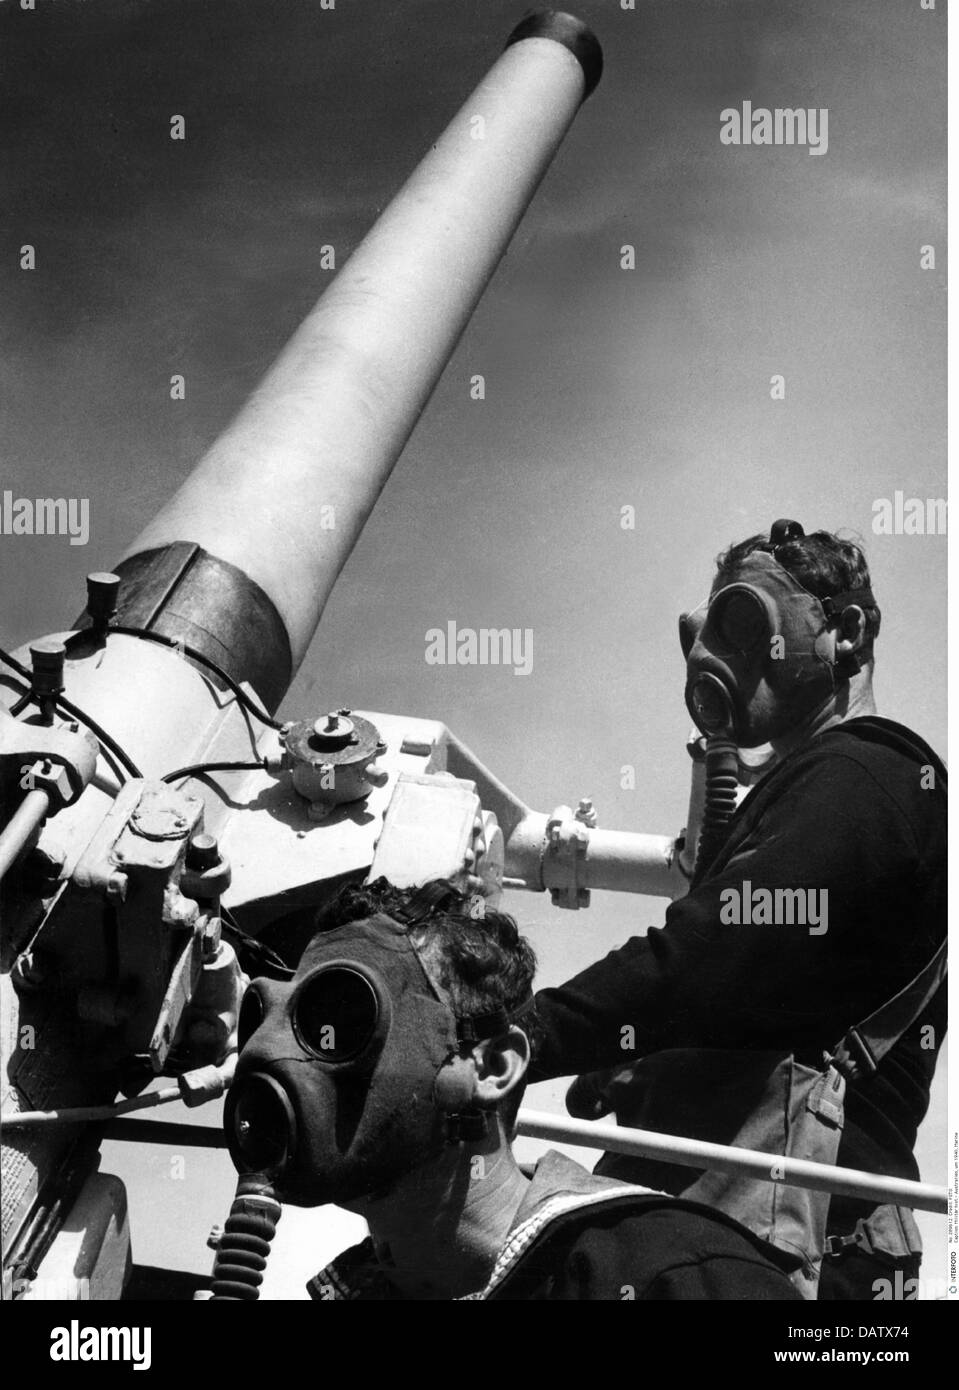 military, Australia, circa 1940, navy, anti-aircraft gunnery drill, artillerymen with gas masks on board of HMAS 'Canberra', exercise in the Jervis Bay, Additional-Rights-Clearences-Not Available Stock Photo